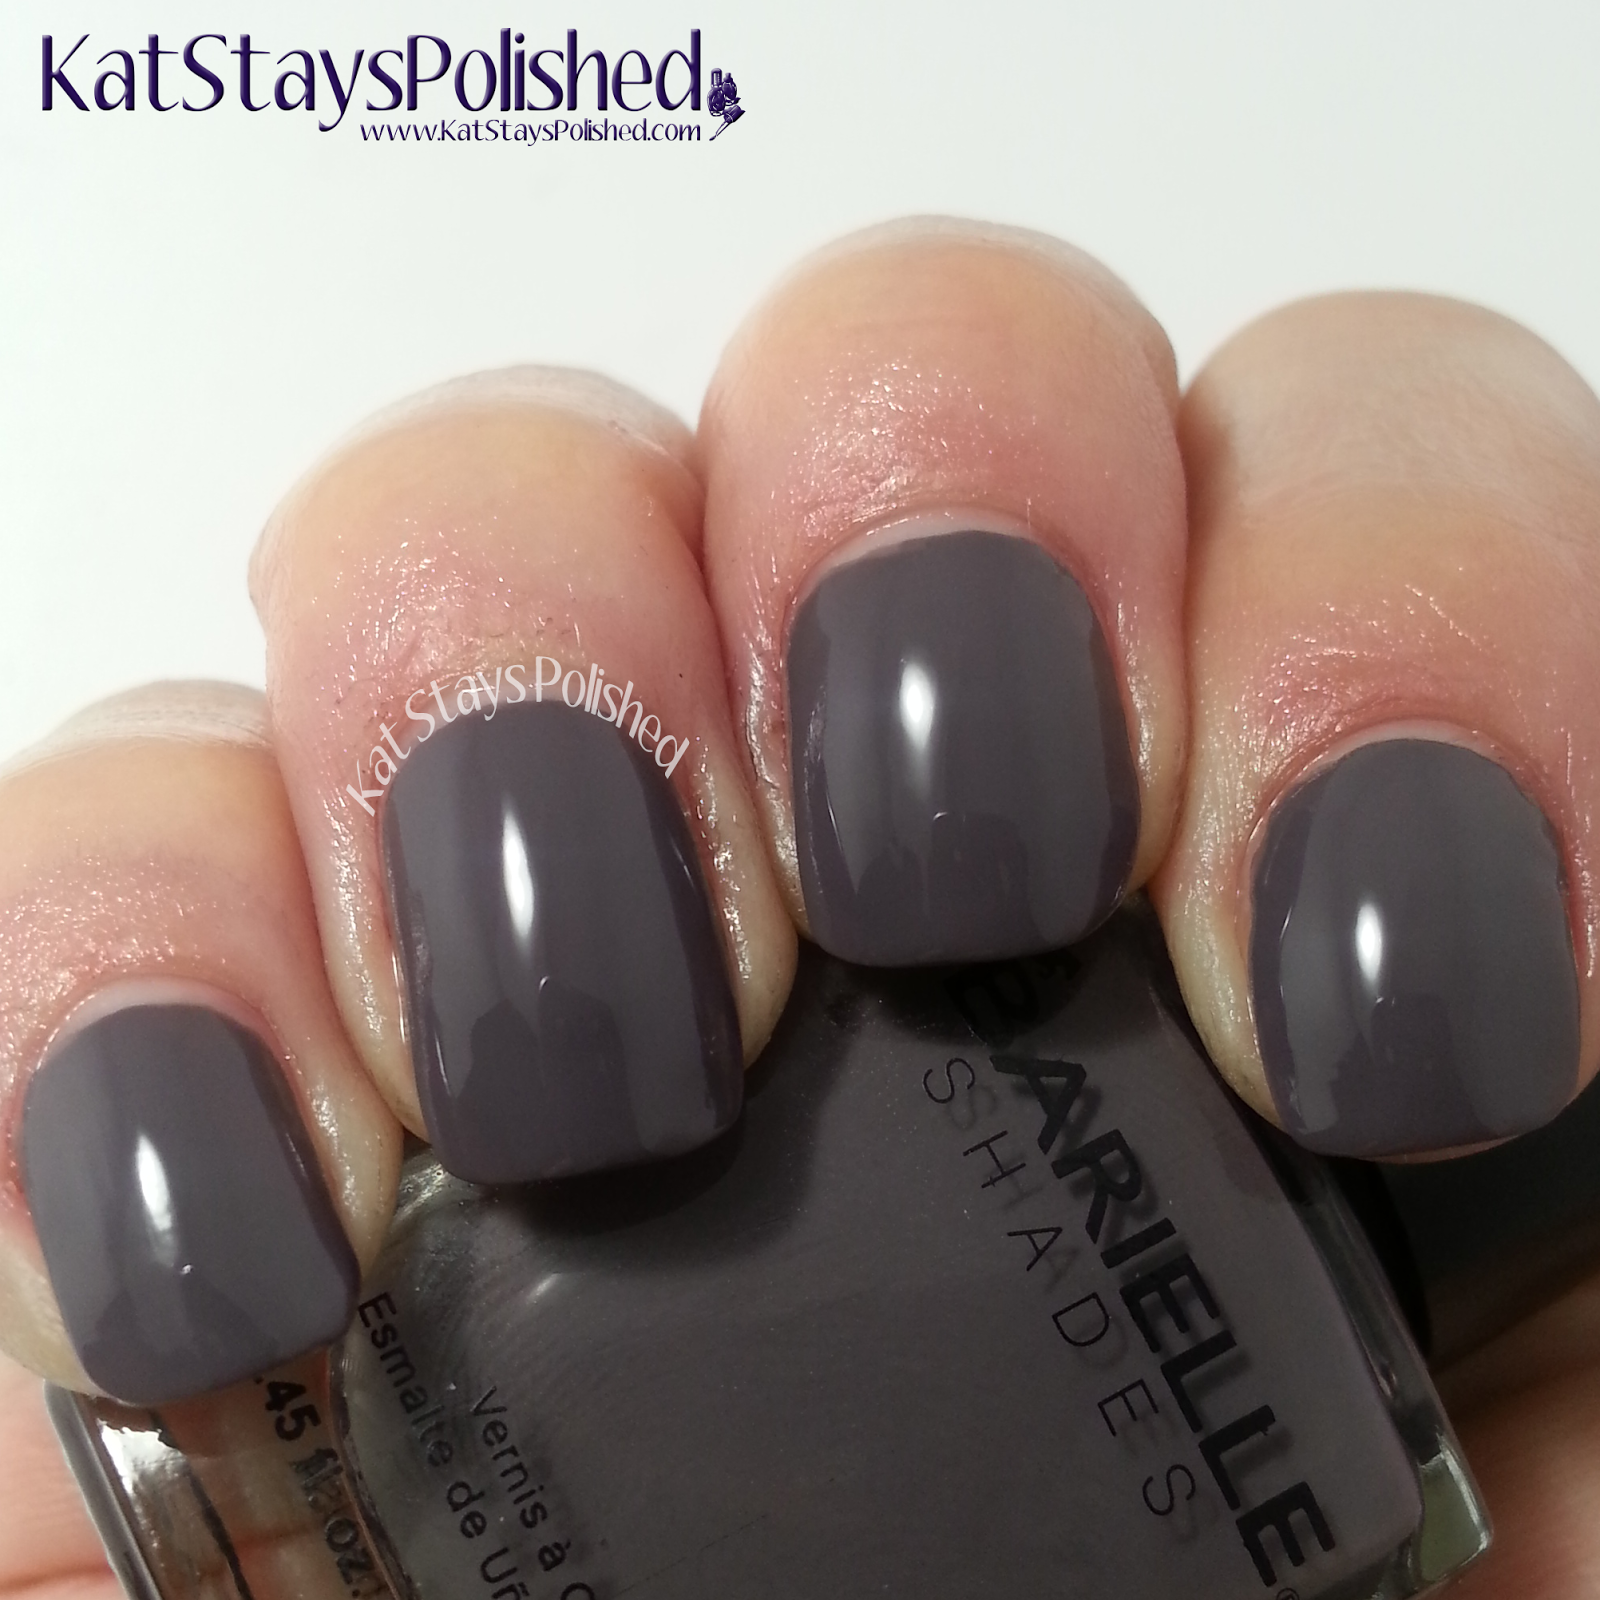 Barielle Me Couture - Taupe Notch | Kat Stays Polished